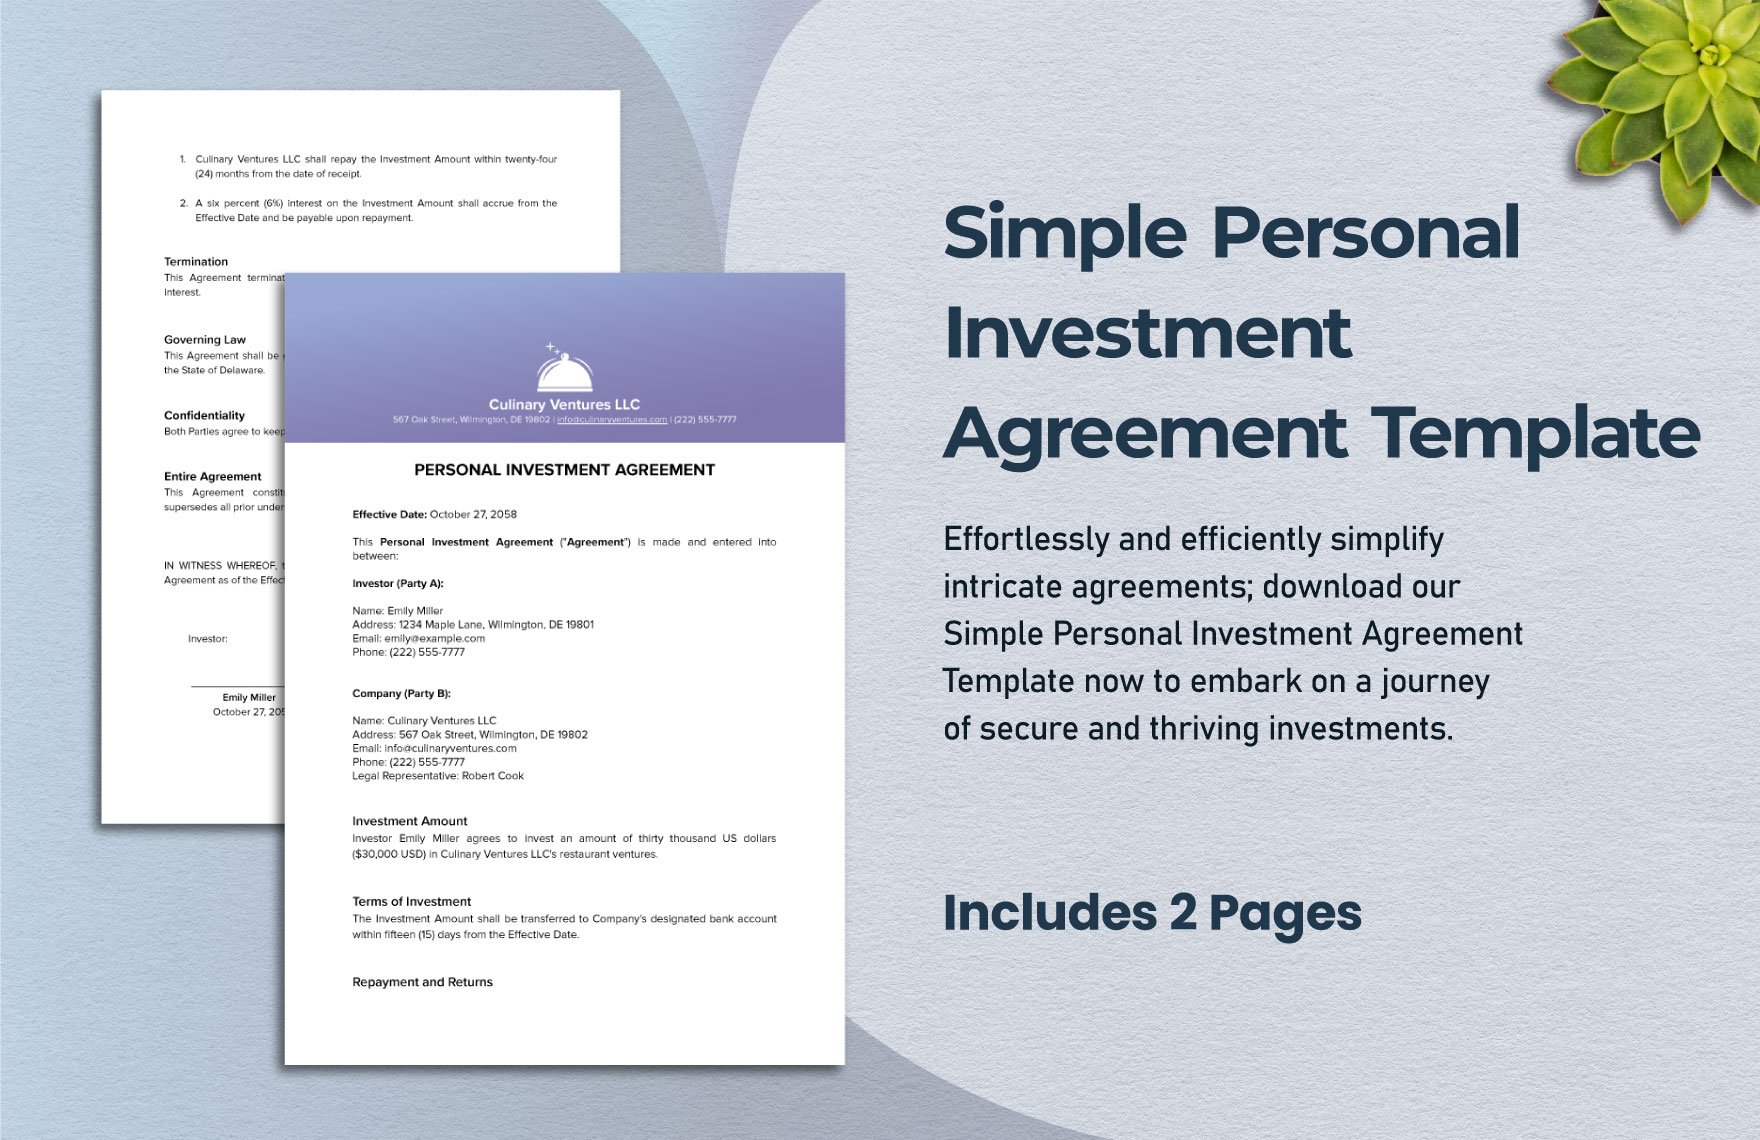 Simple Personal Investment Agreement Template